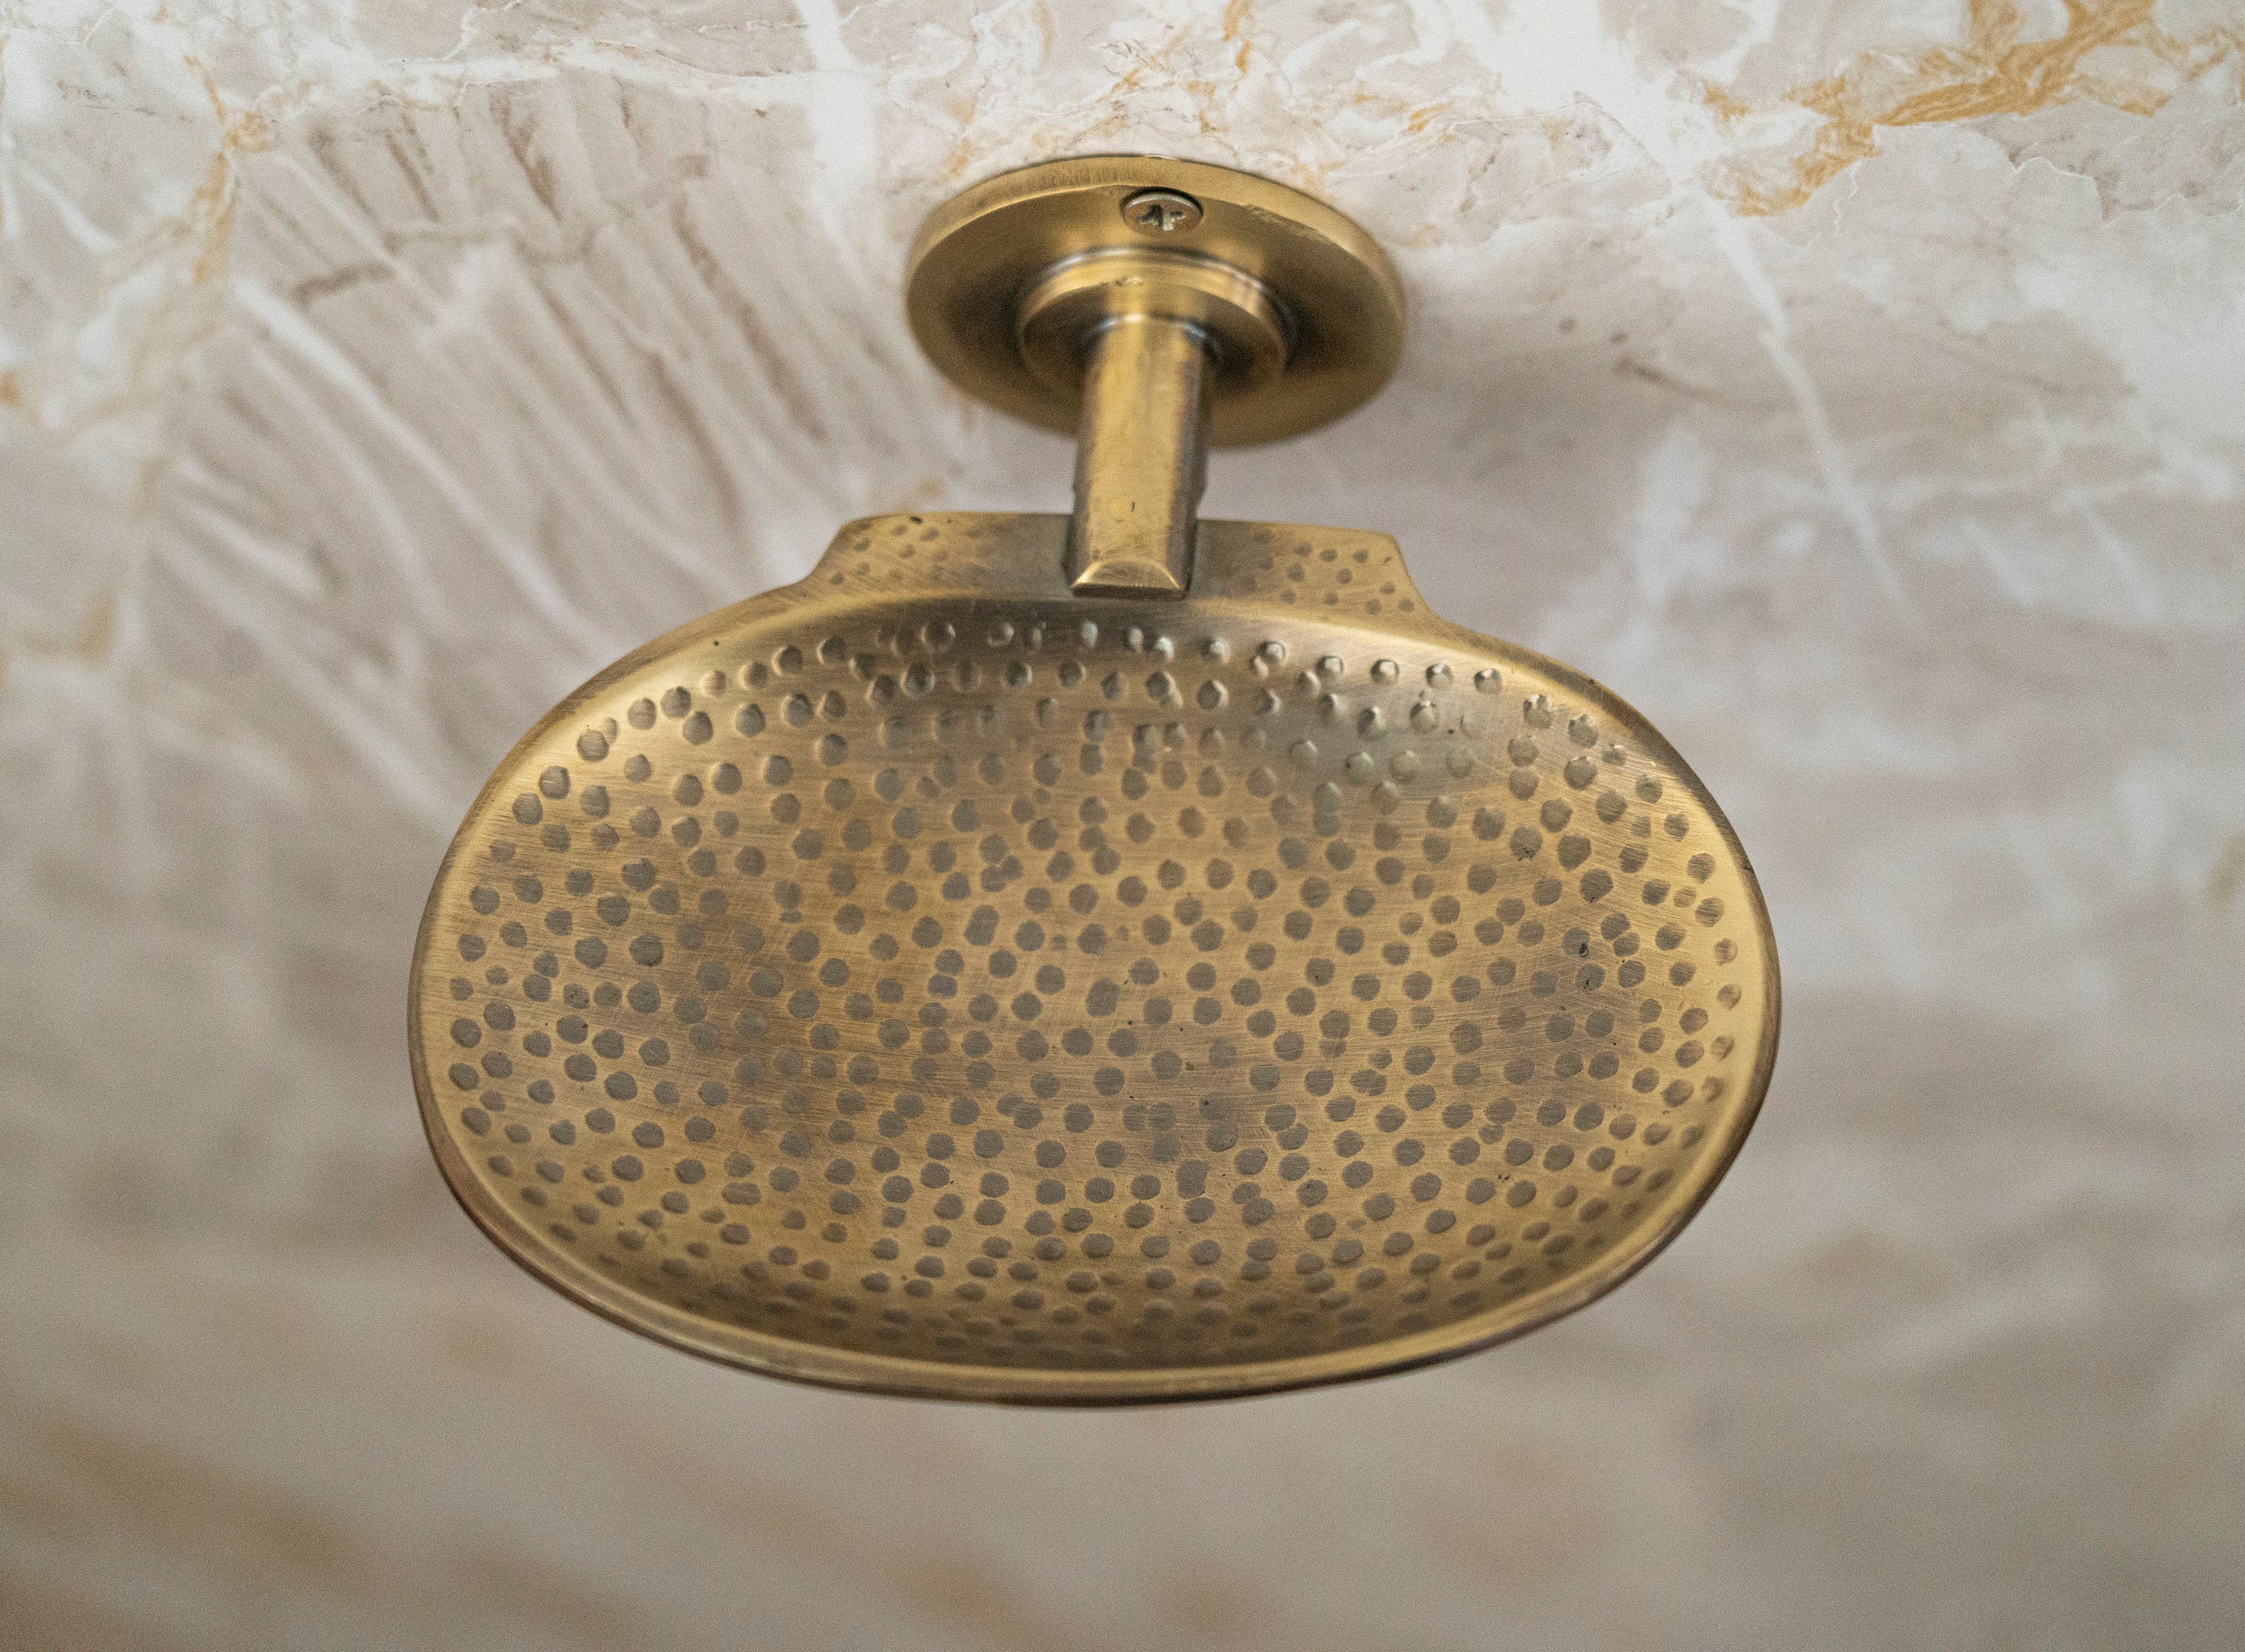 Vintage Style Hammered Solid Brass Wall Mounted Bath Shower Soap Dish Holder Bathroom Accessories Zayian